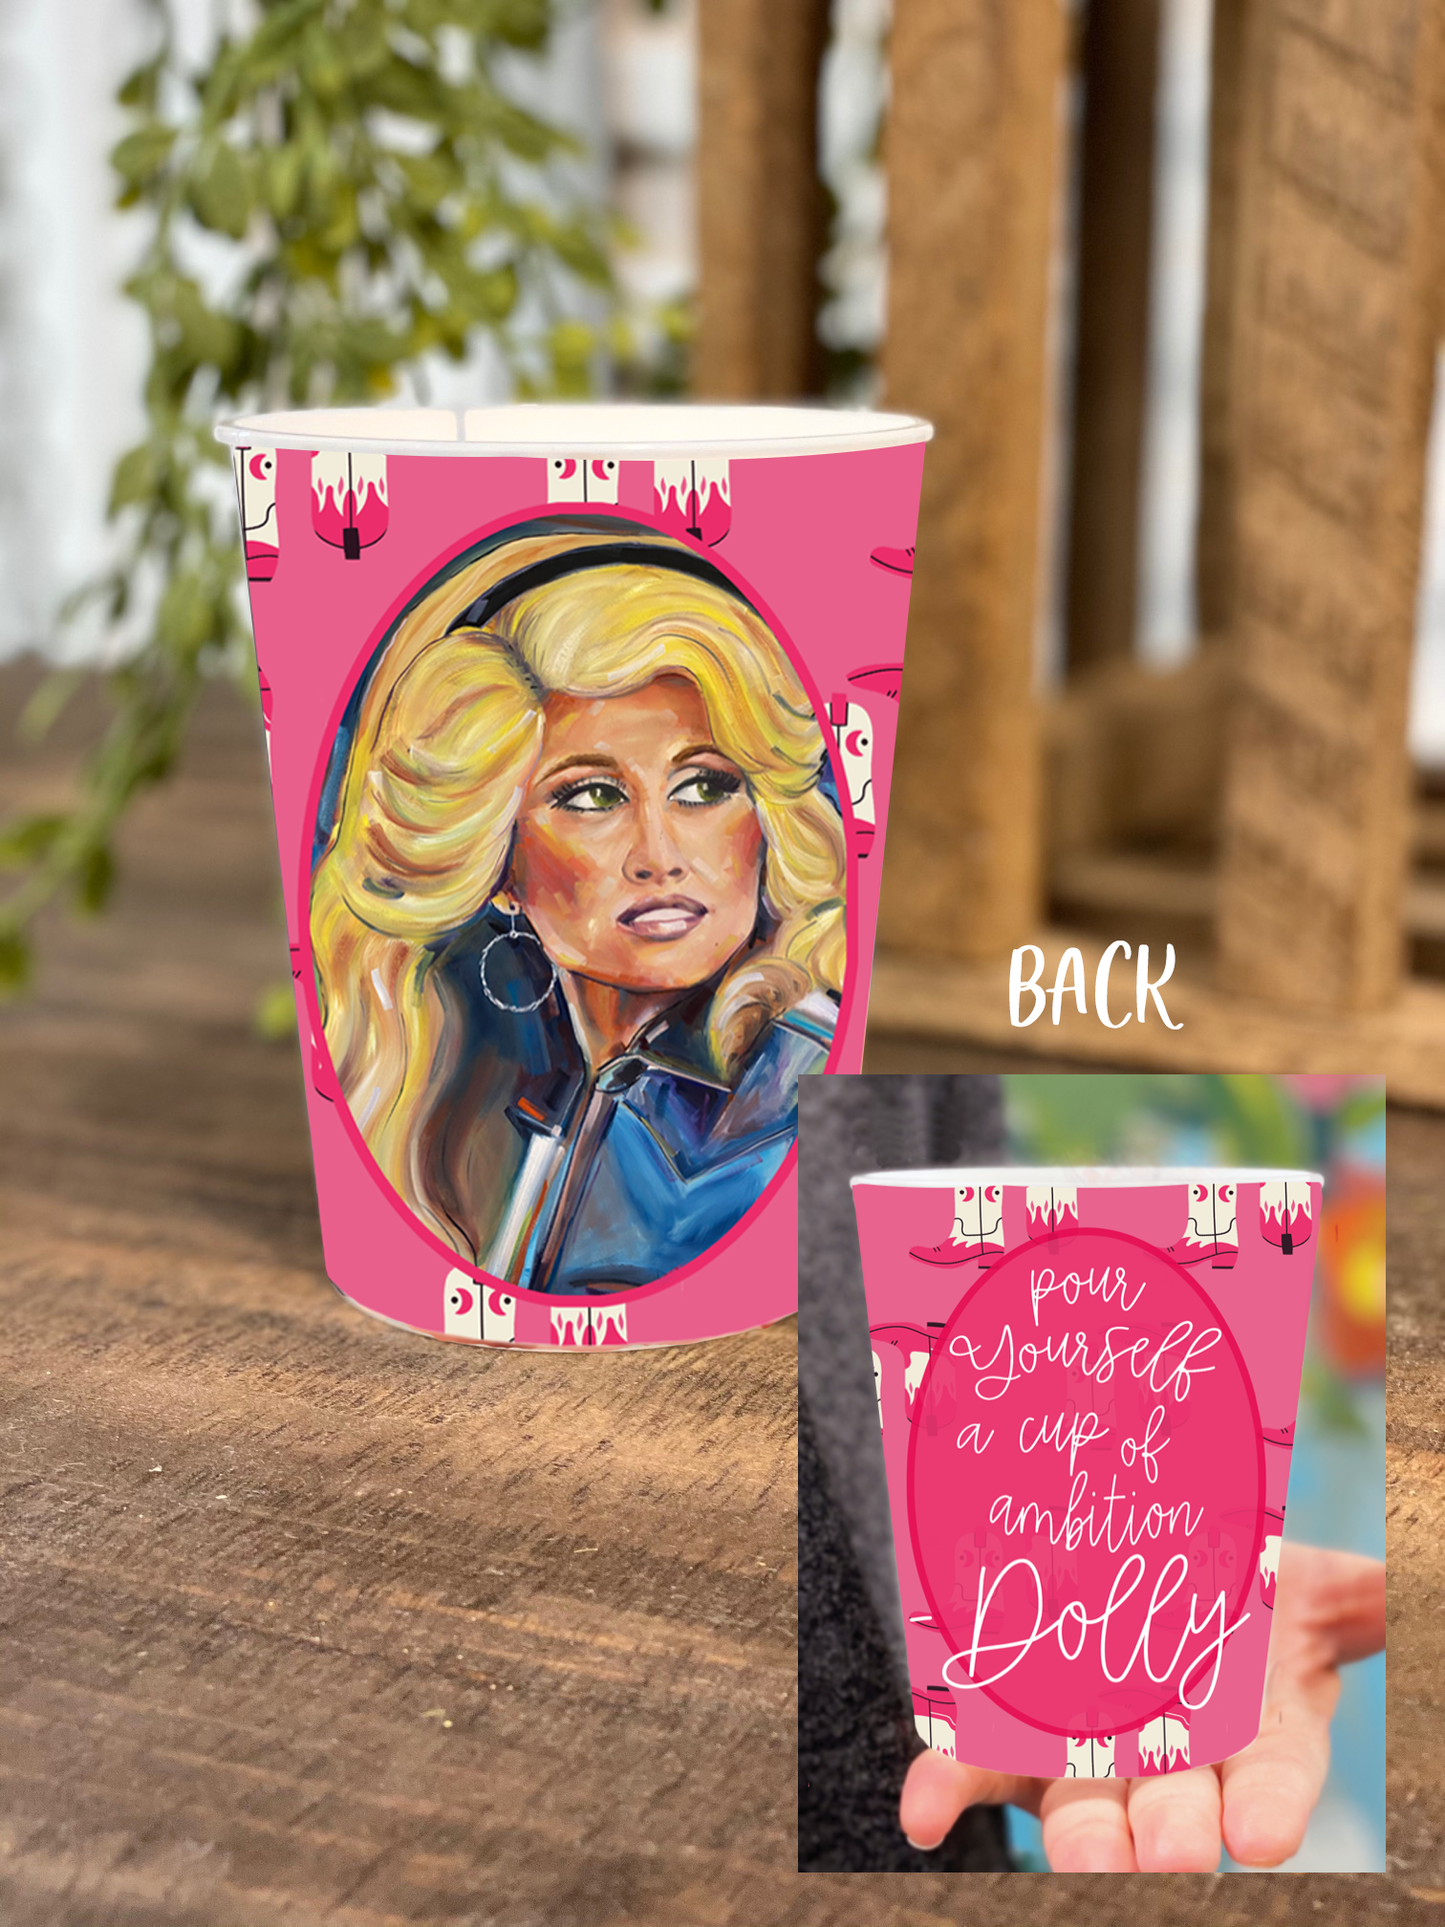 Dolly Parton Party Cups: Unwrapped